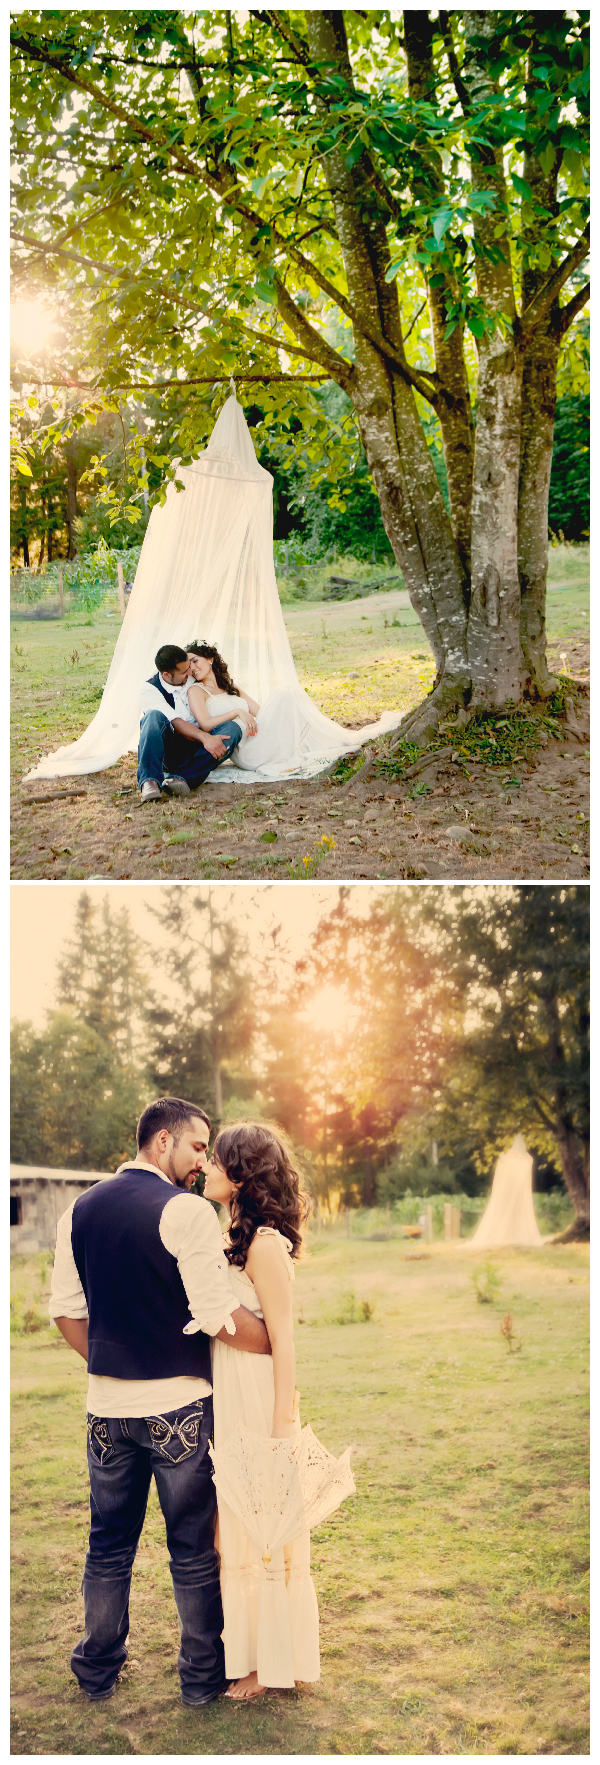 Engagement photo sessions by Karen Wolfe Photography